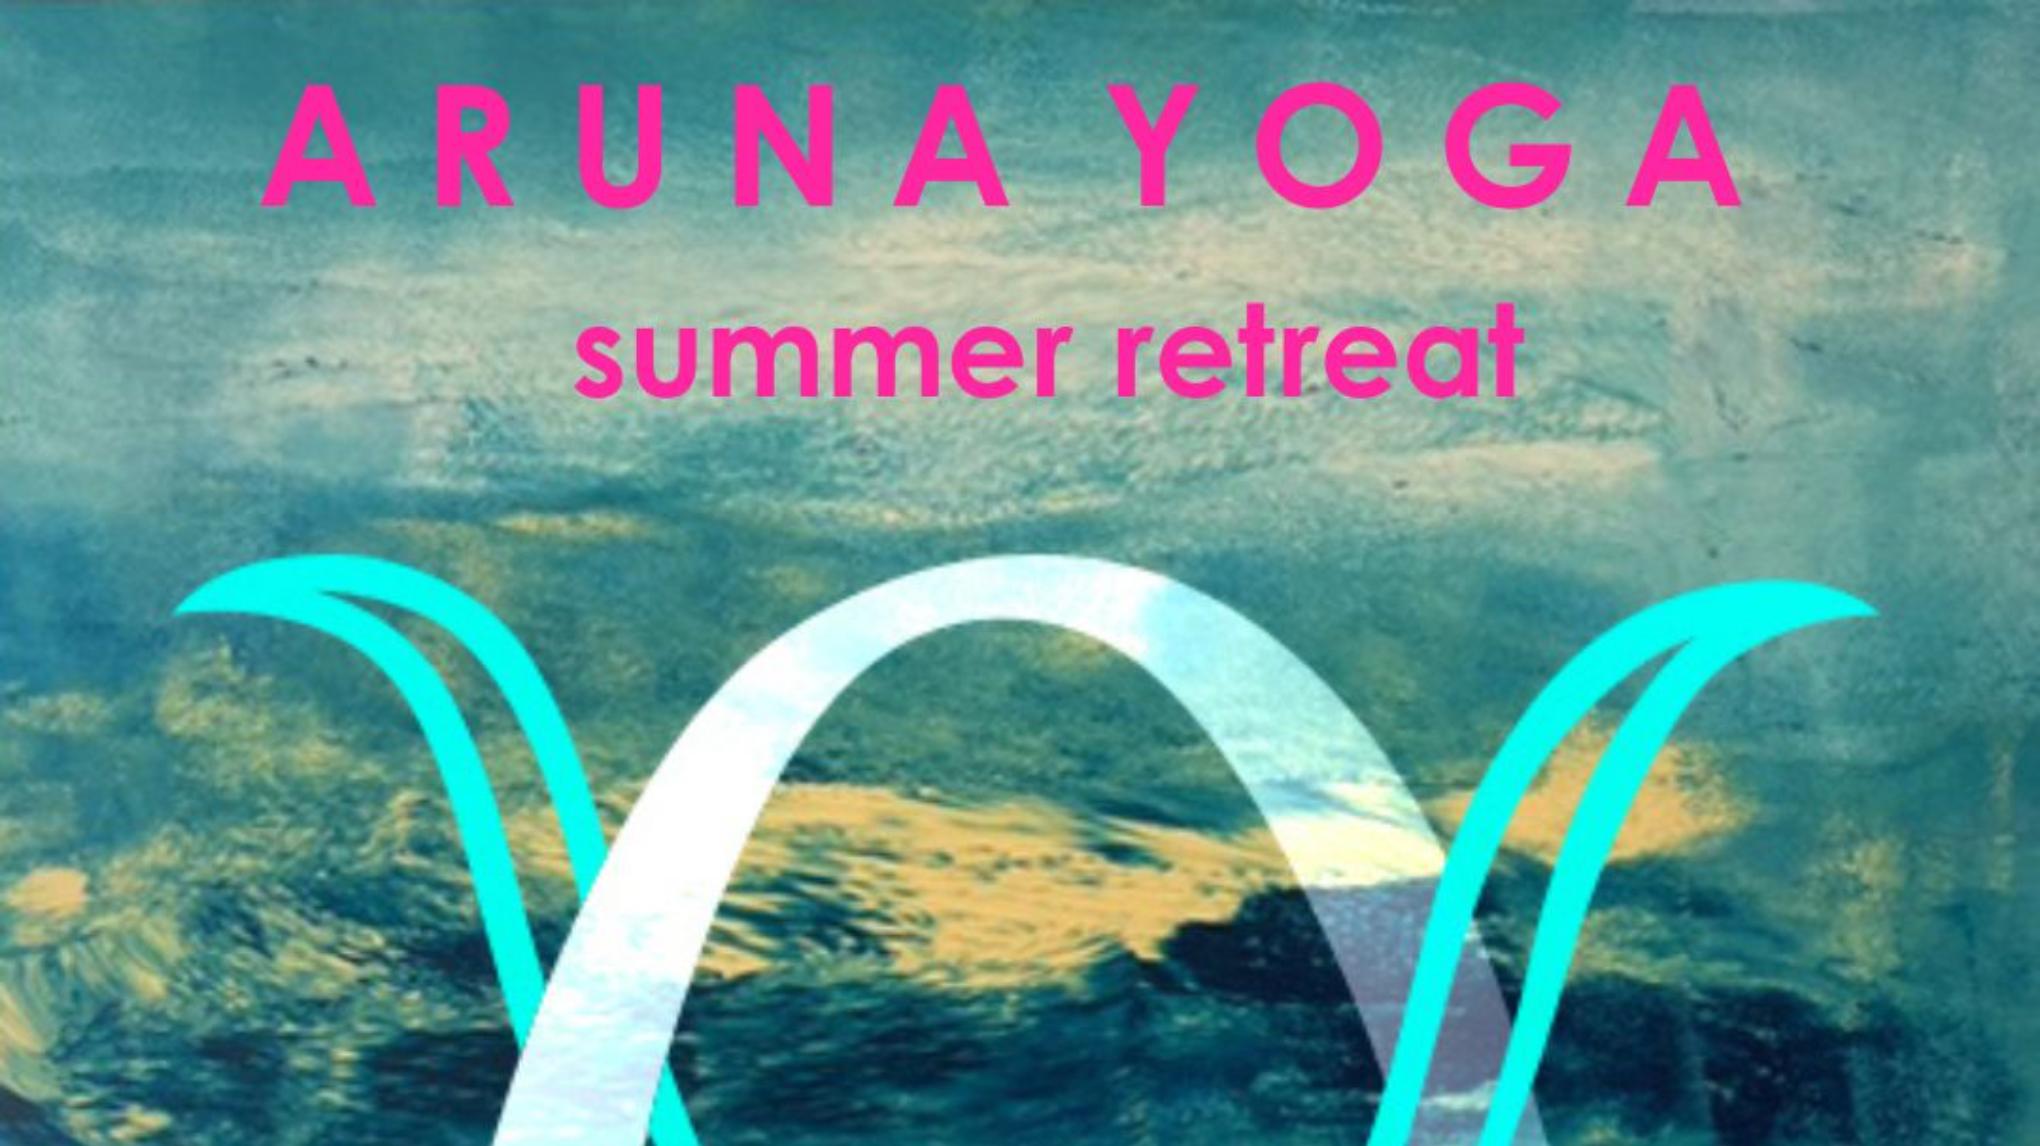 Summer Retreat with Nicki Forman and guests